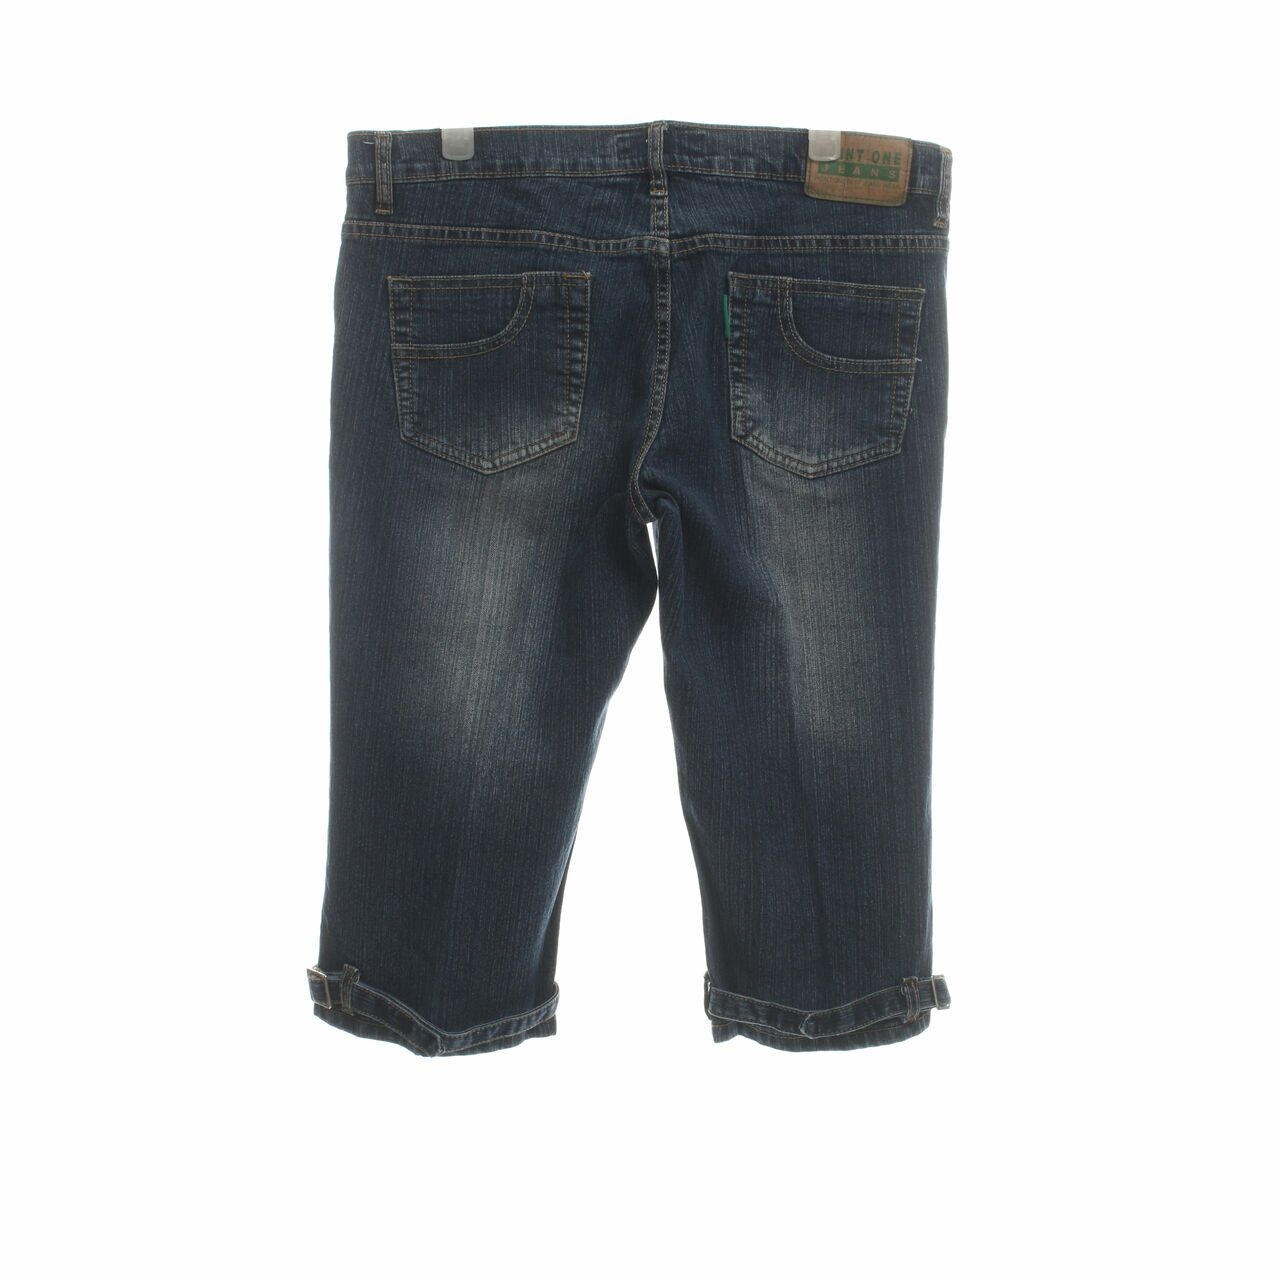 Point One Jeans Dark Blue Cropped Pants